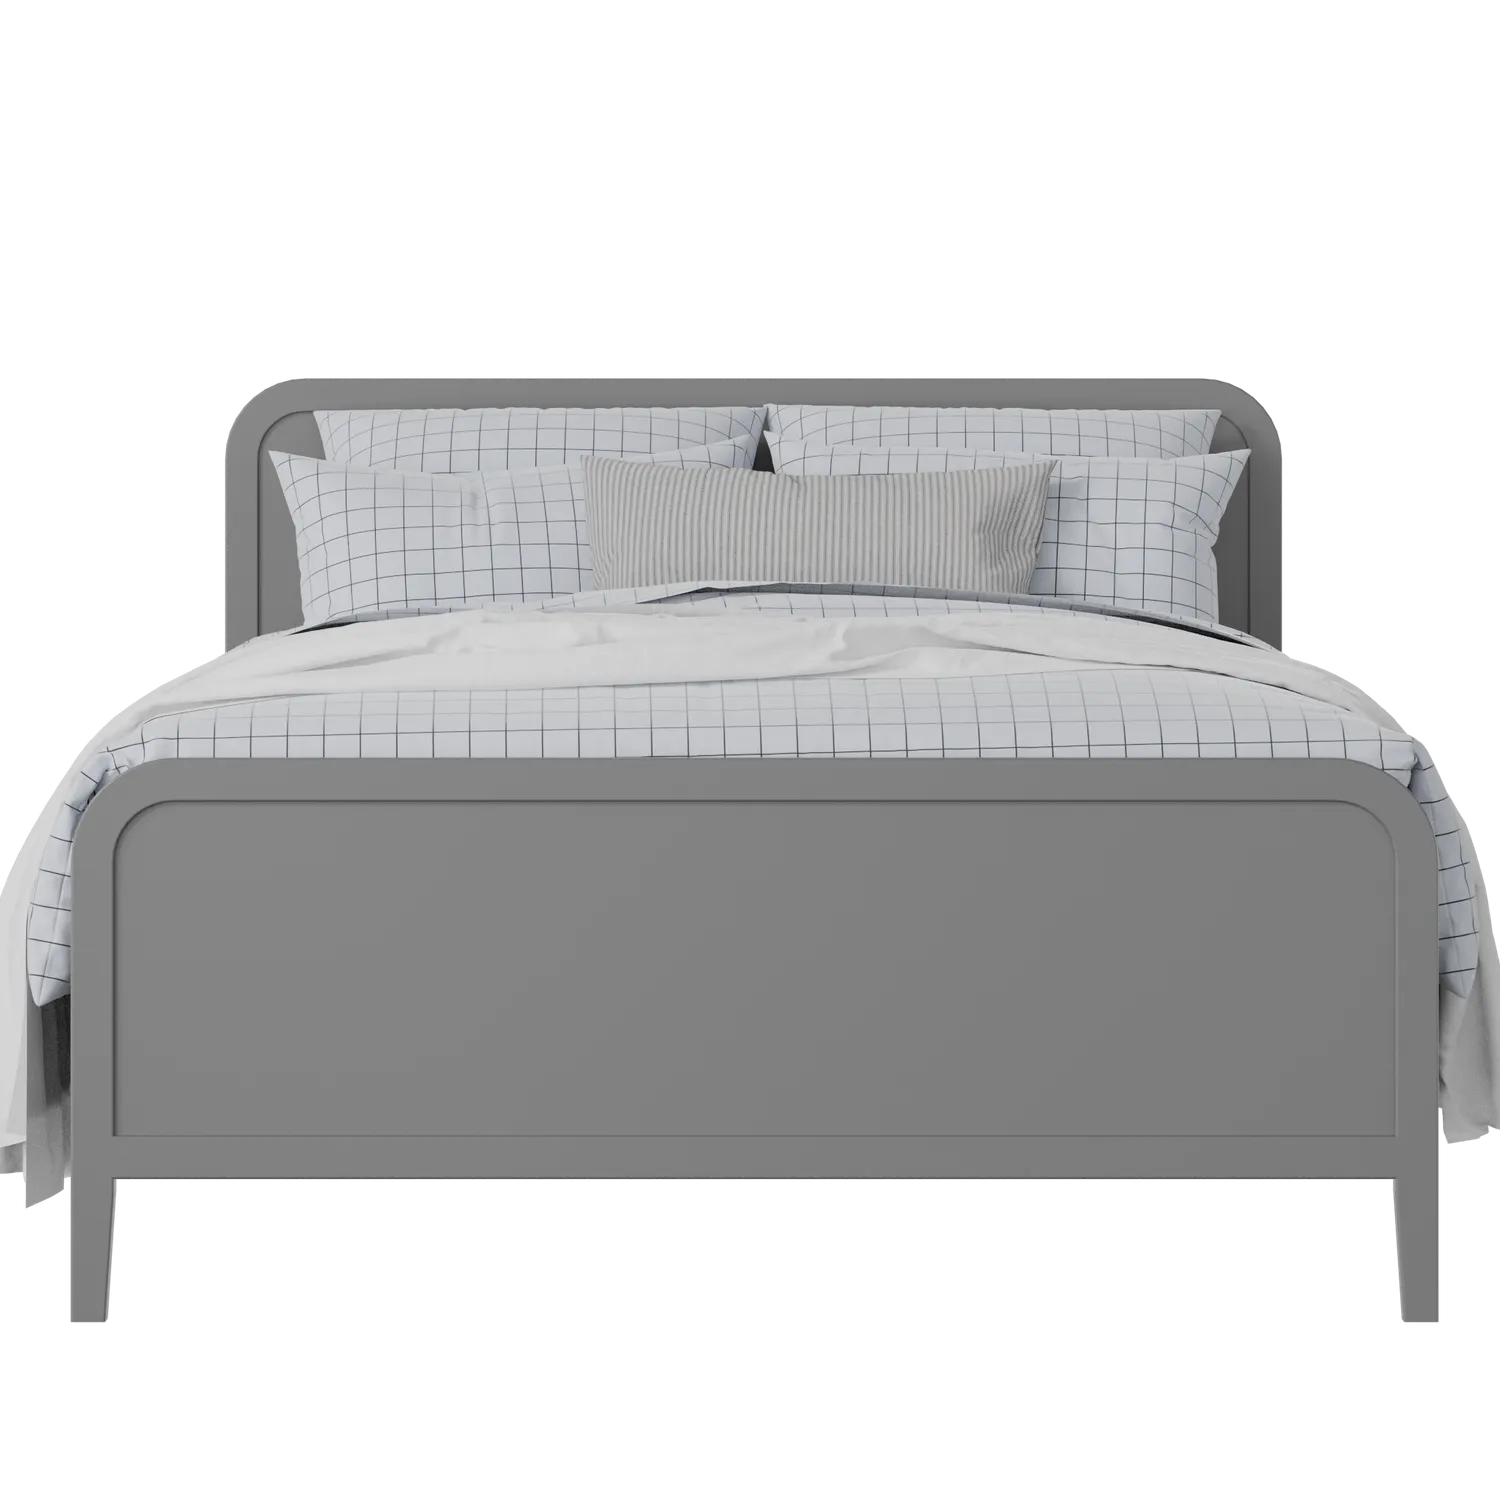 Keats painted wood bed in grey with Juno mattress